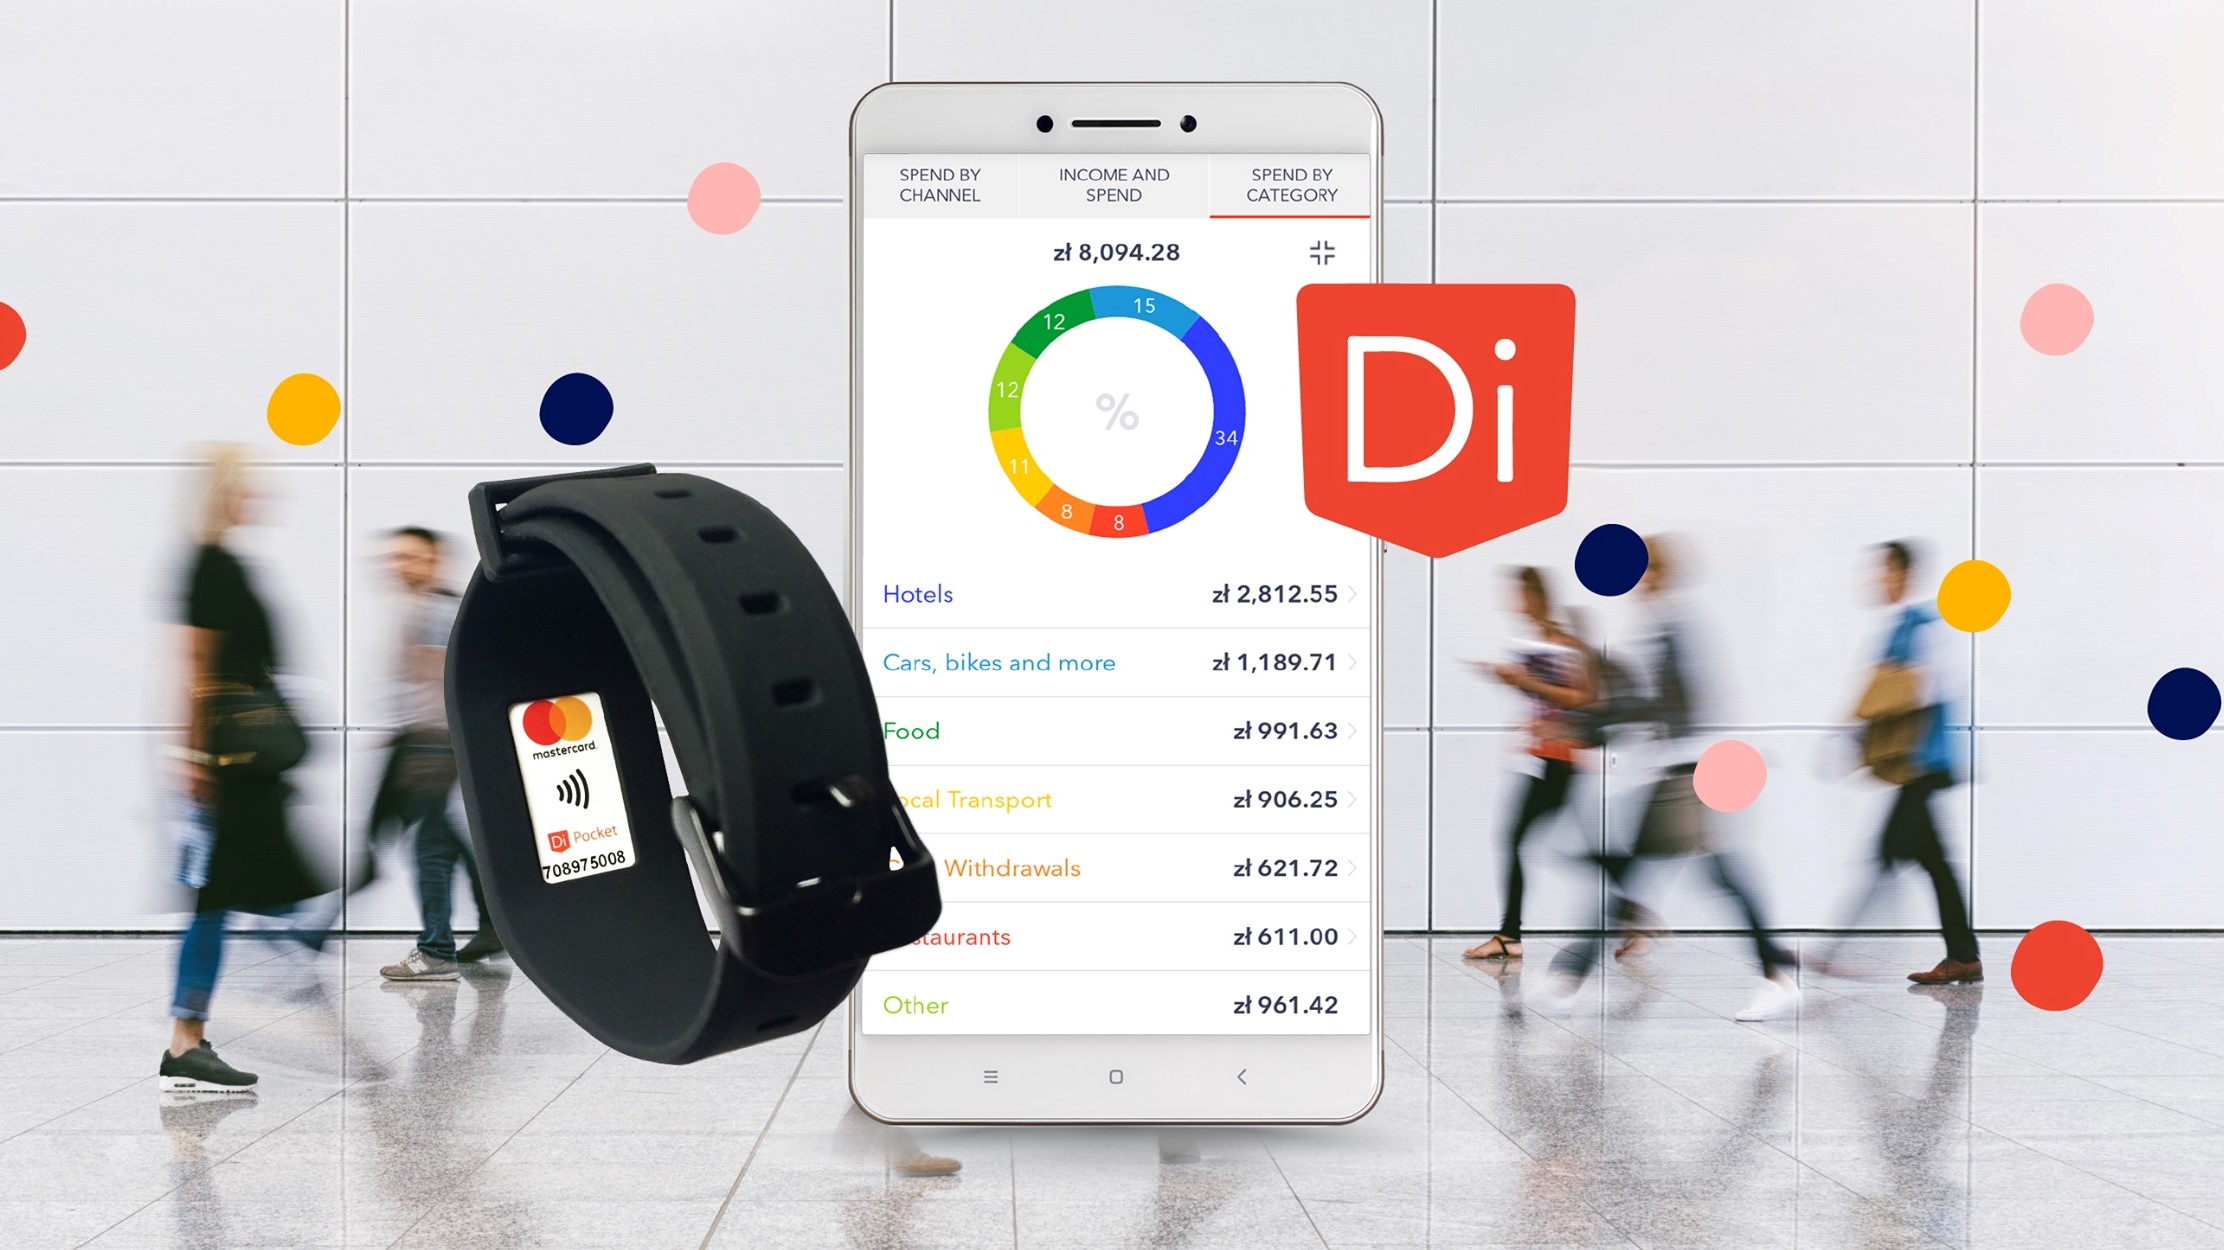 DiPocket secures £5.37 million Series A investment from GB & Partners Investment Management